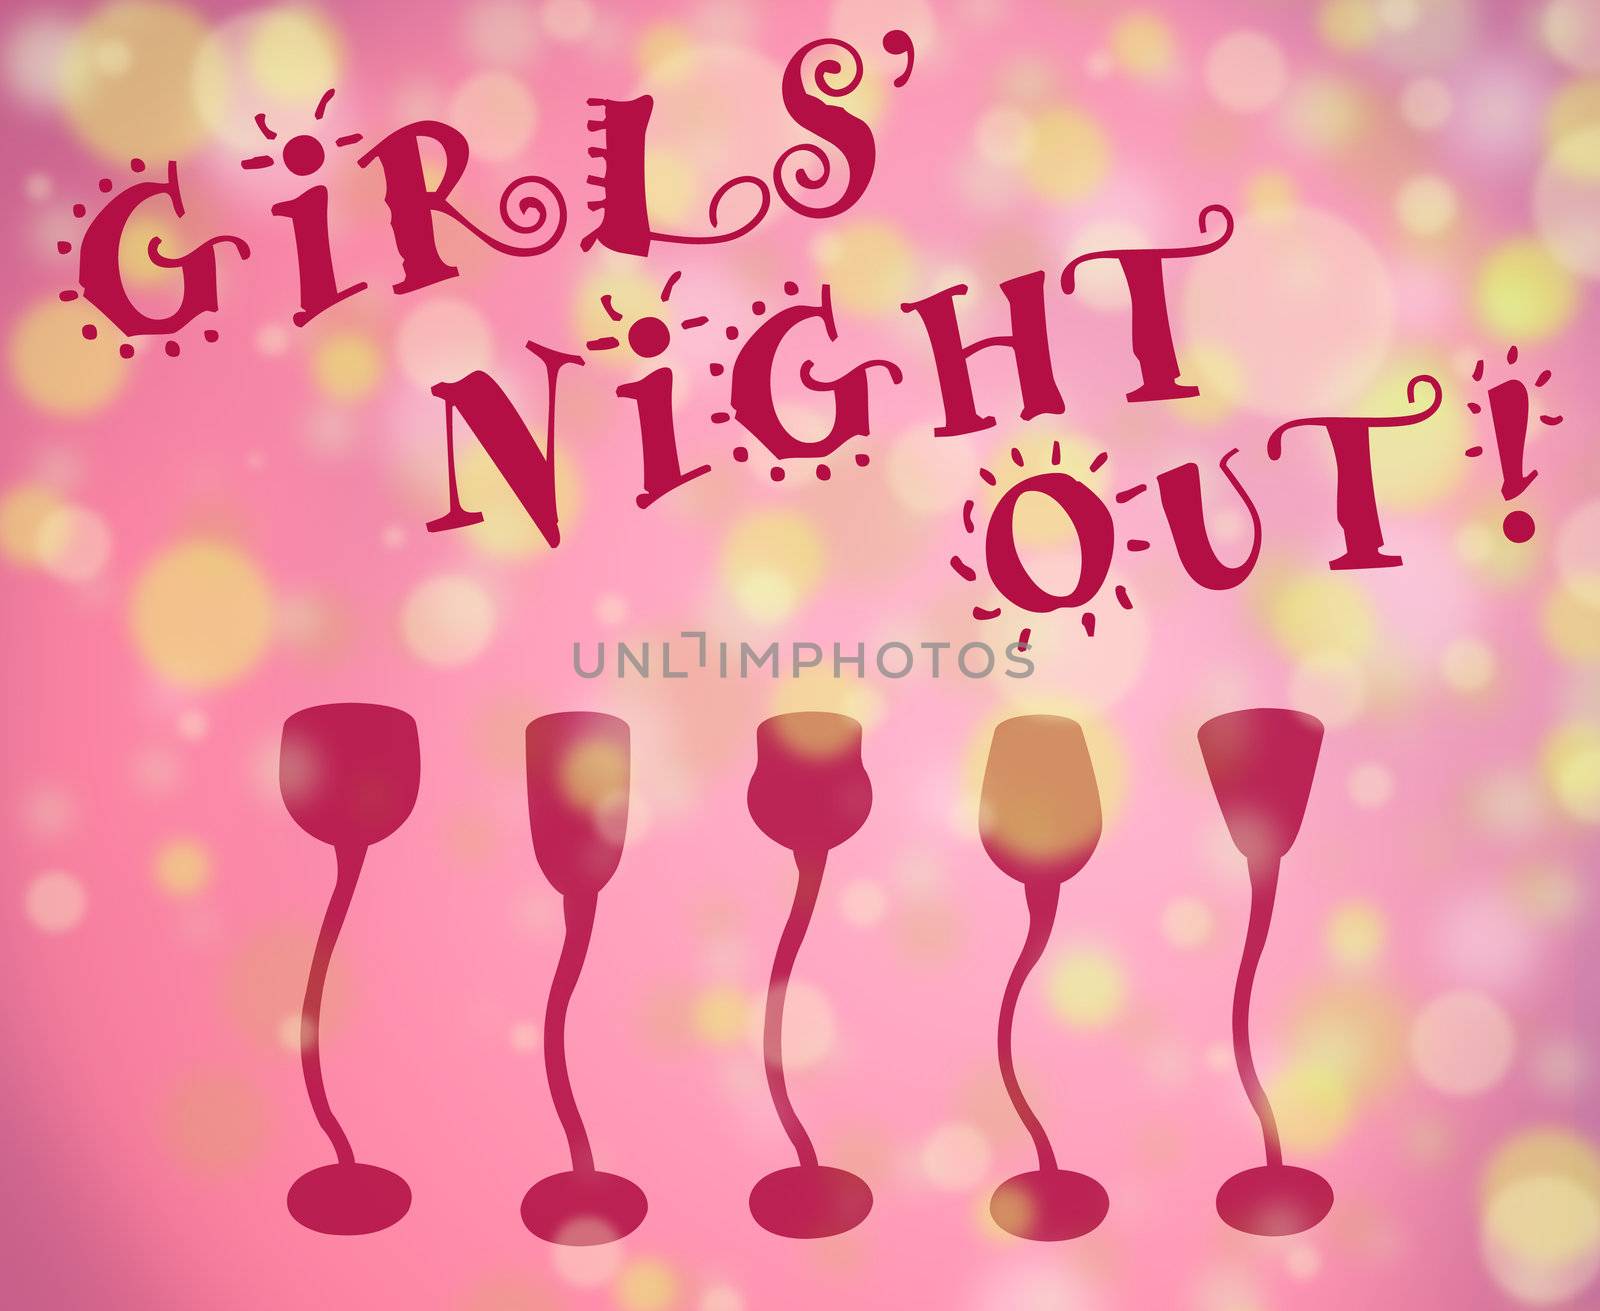 Girls' night out background by Mirage3